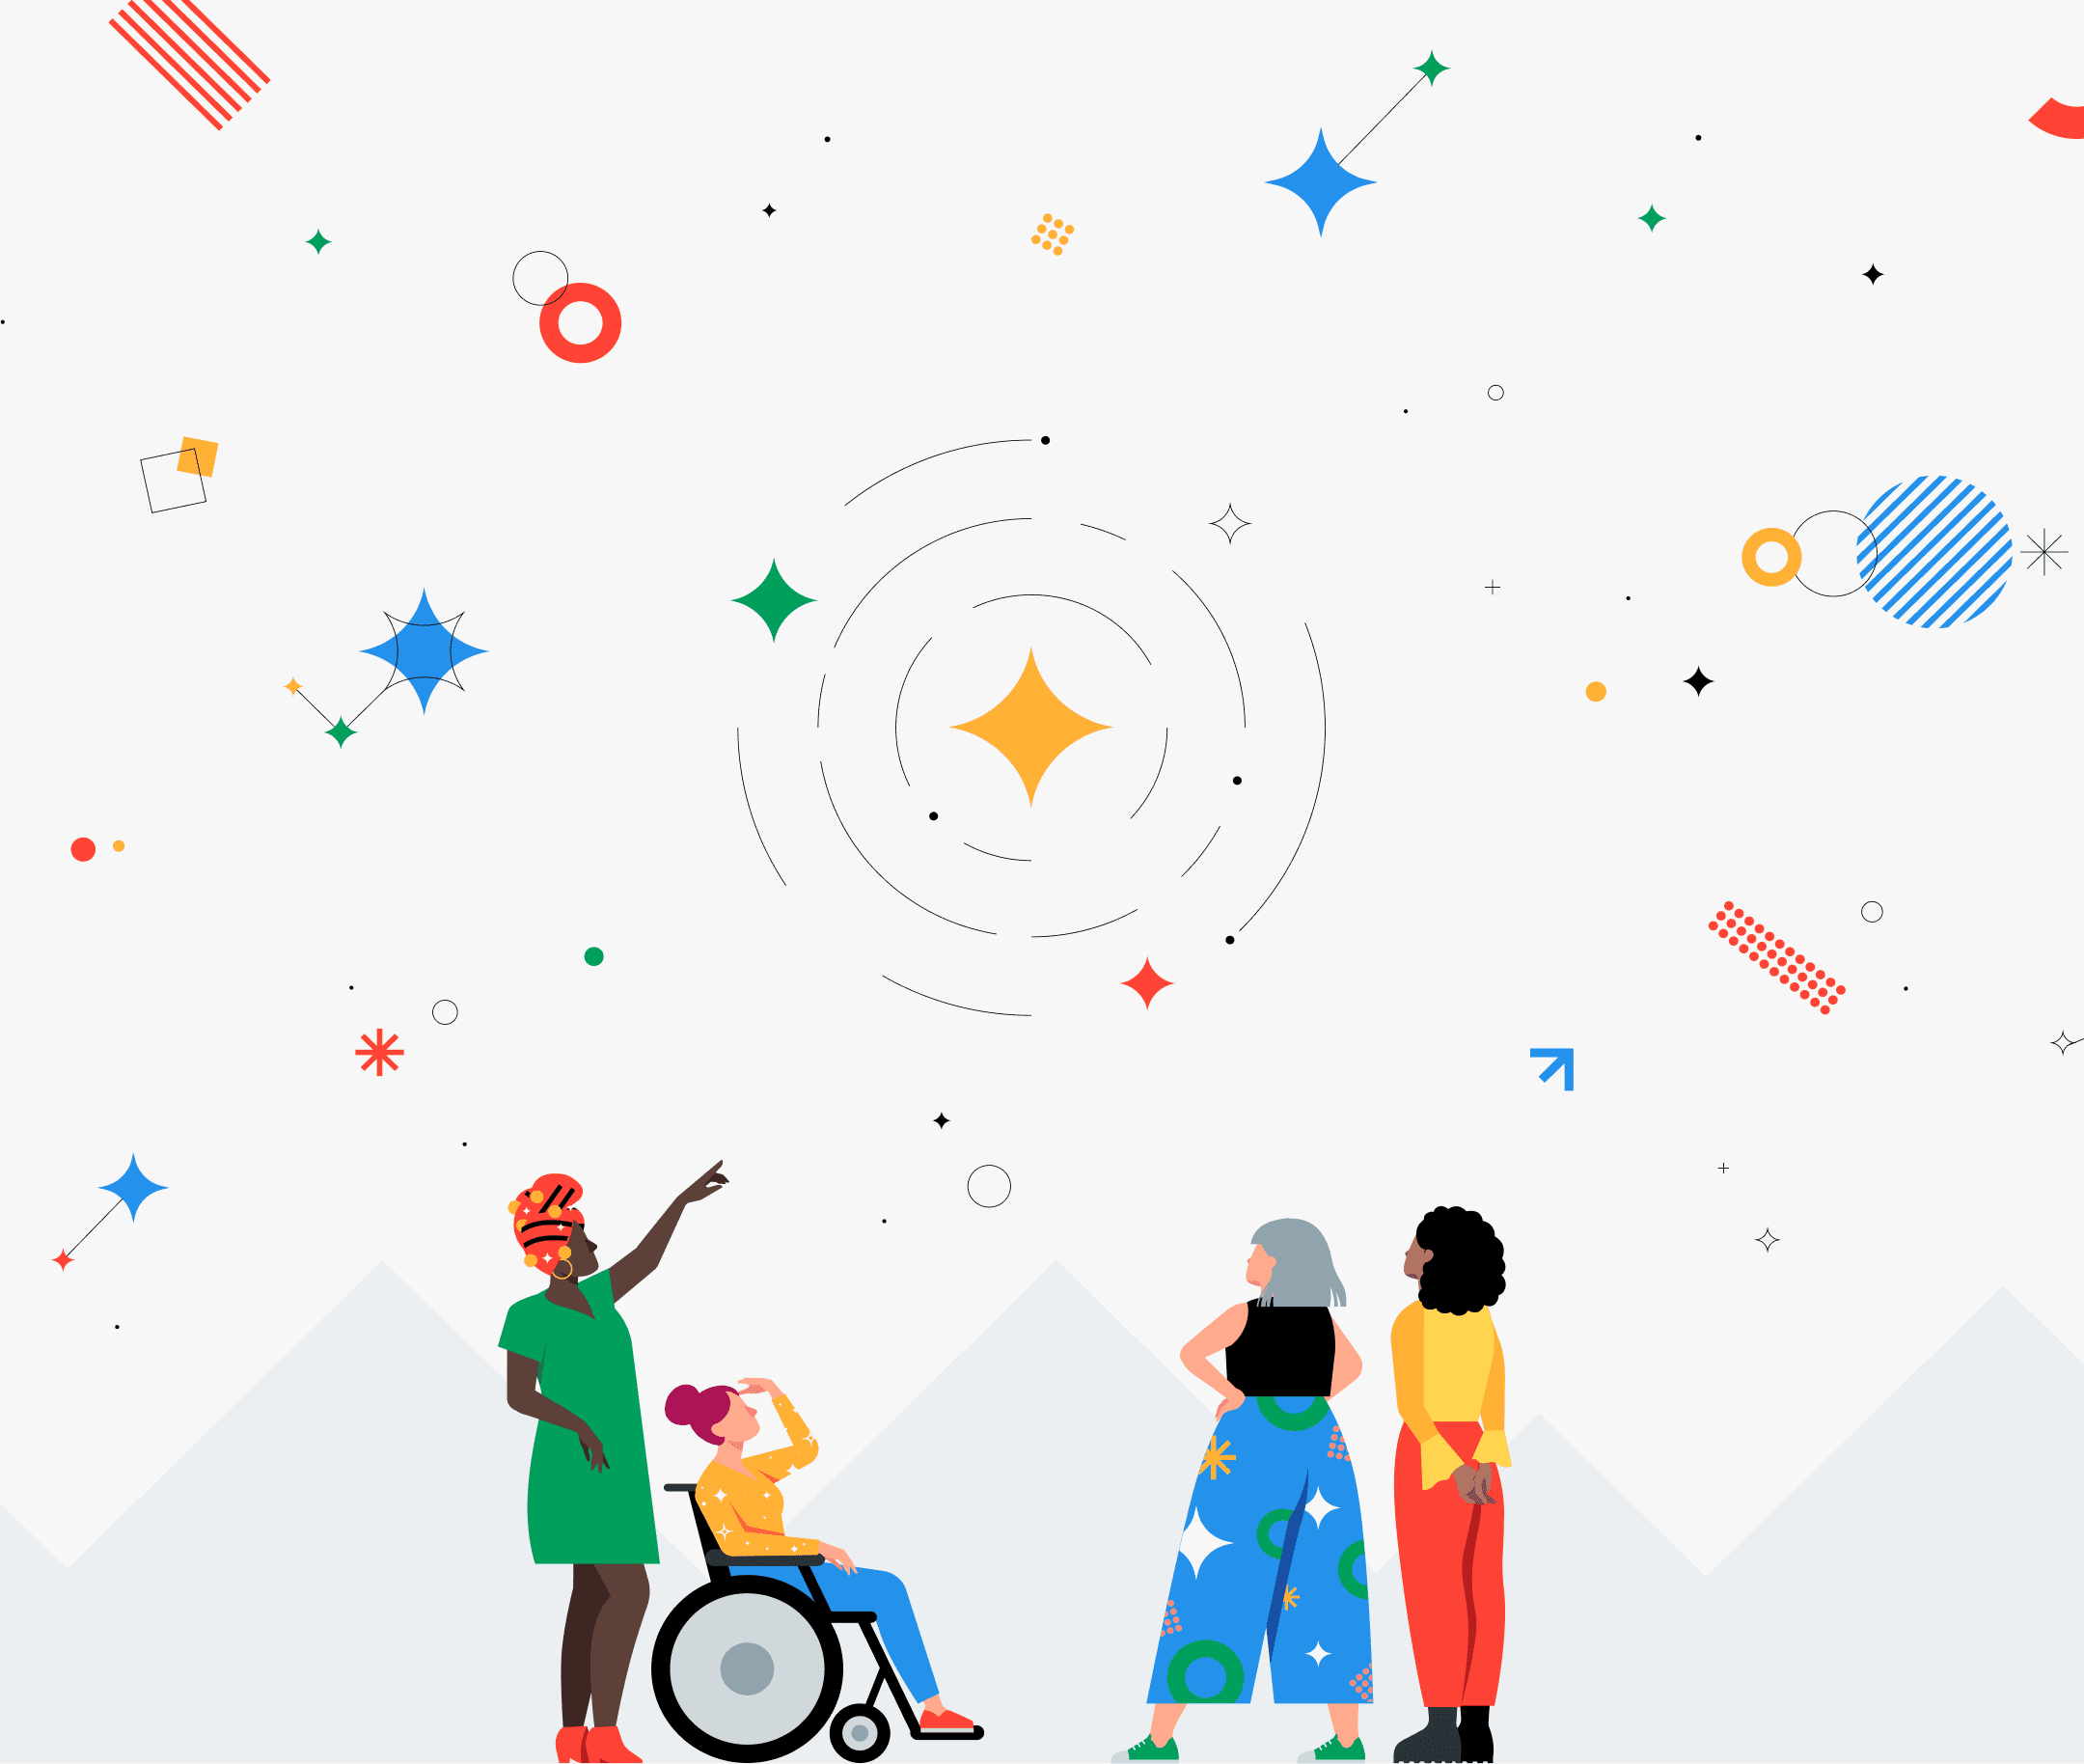 Google Polaris pattern & characters landscape graphic, cropped